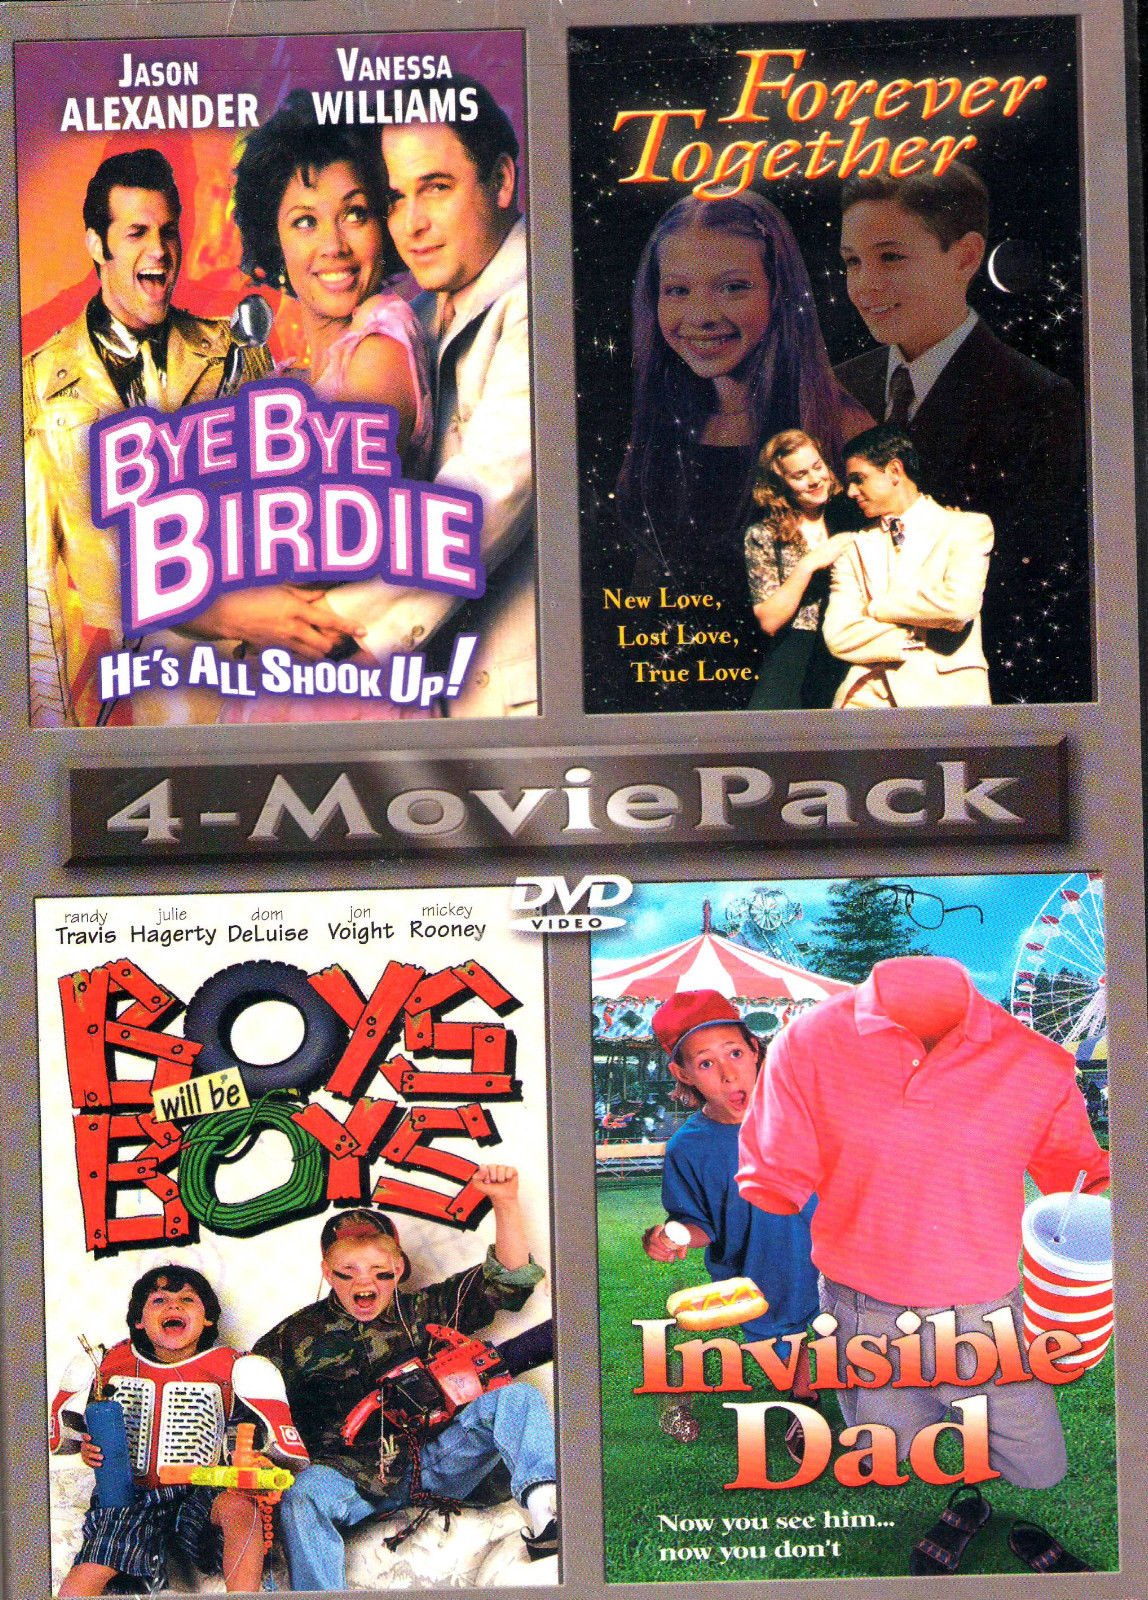 4-Movie Pack (Bye-Bye Birdie, Forever Together, Boys Will Be Boys & Invisible Da